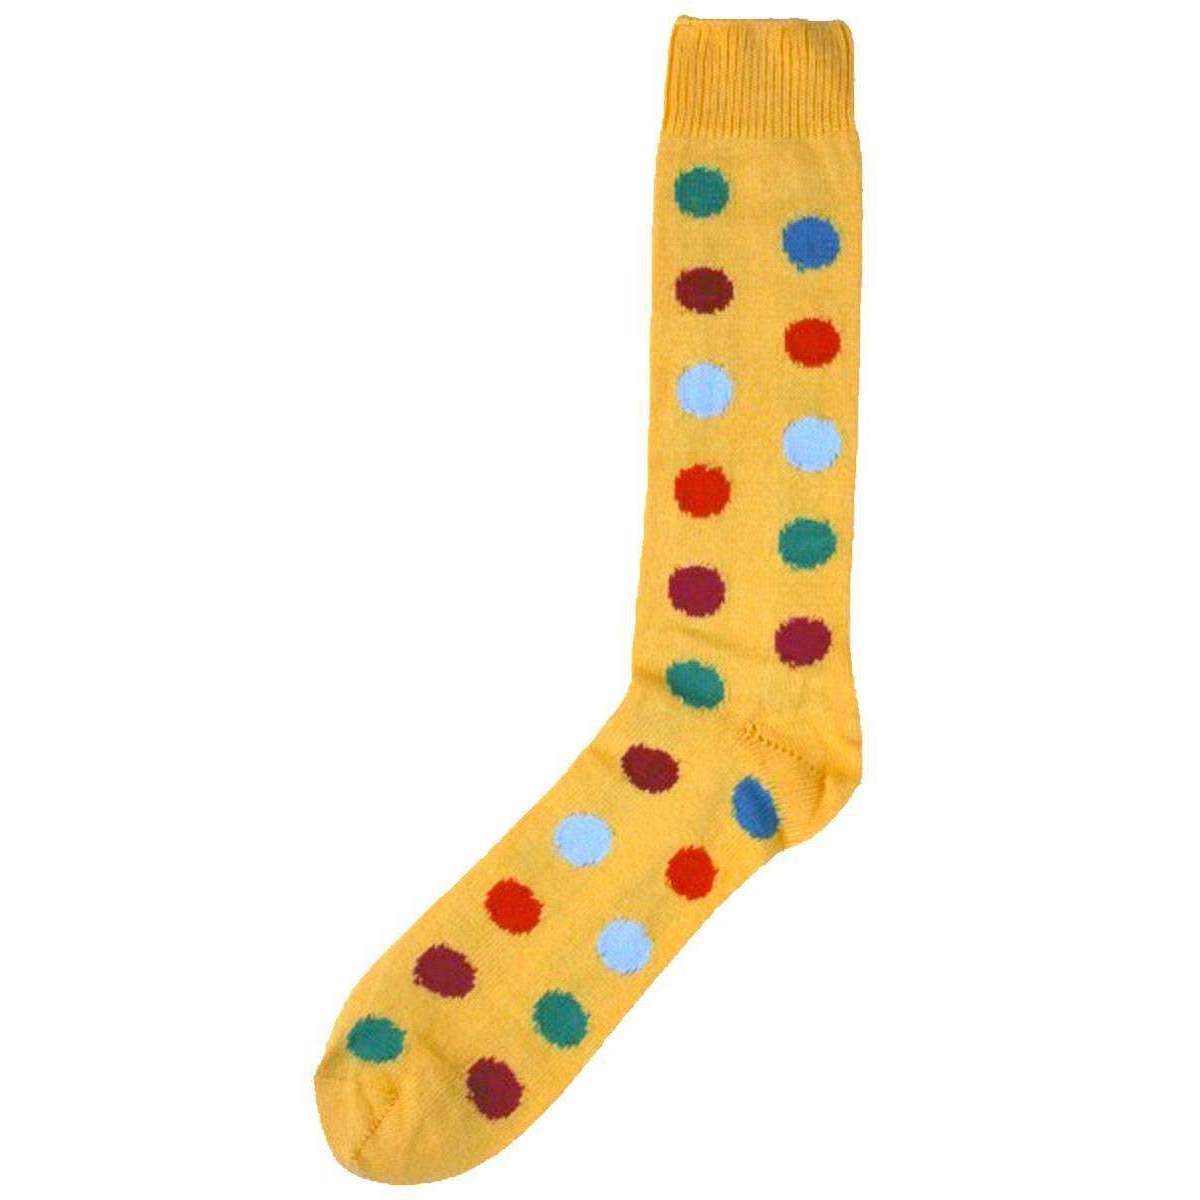 bassin and brown spotted midcalf socks - yellow/multi-colour